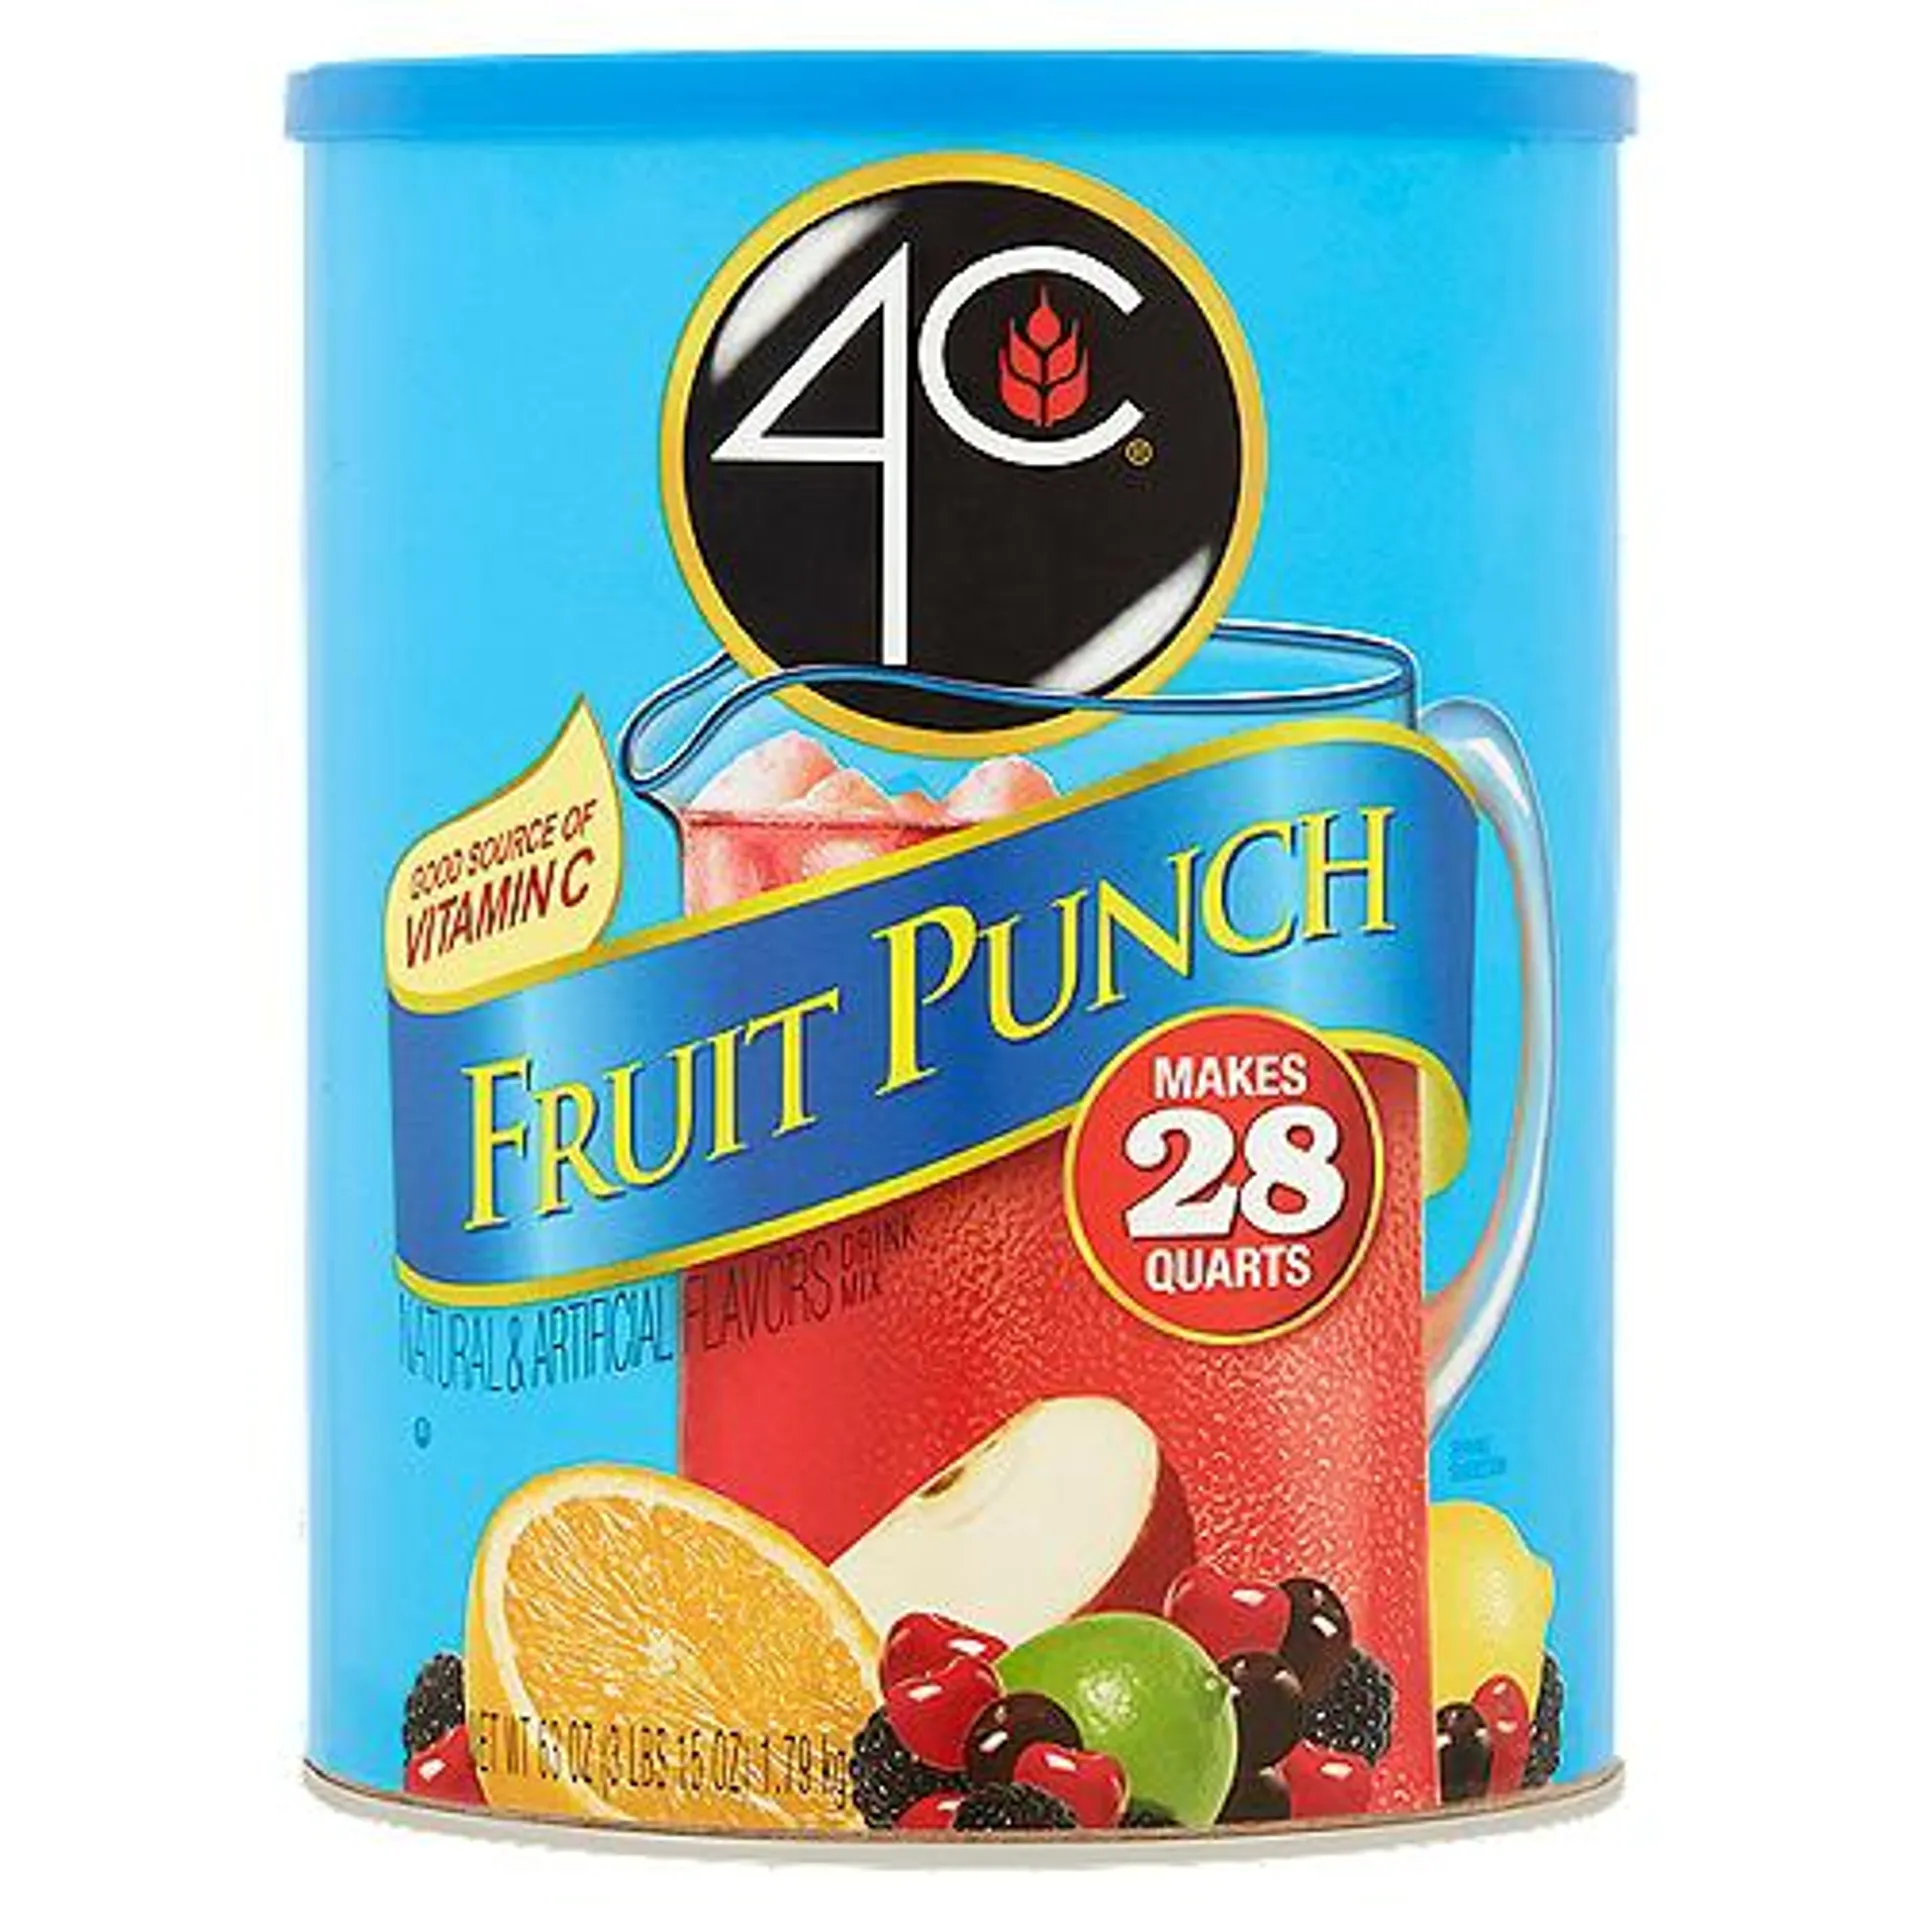 4C Fruit Punch, Drink Mix, 58 Ounce